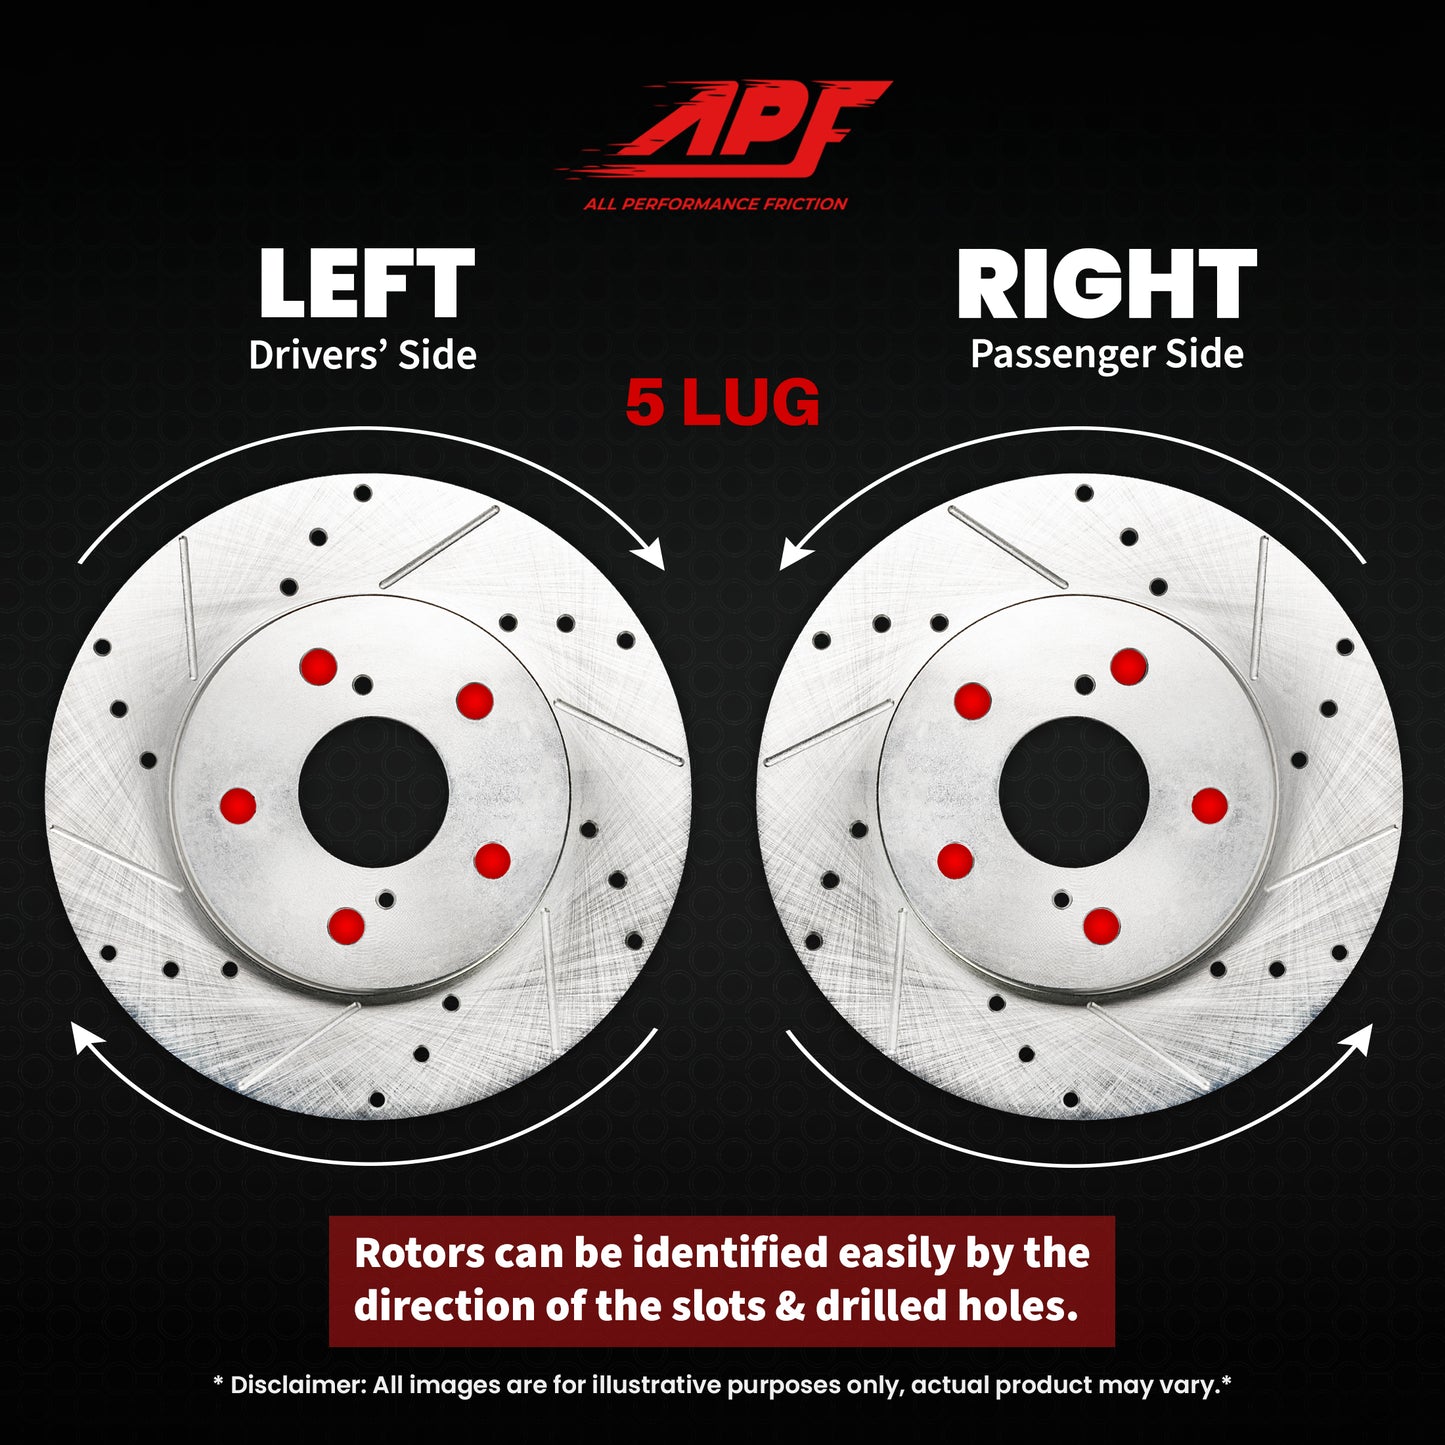 APF All Performance Friction Rear Rotors and Pads Half Kit compatible with Toyota Camry Japan 2000-2001 Zinc Drilled Slotted Rotors with Ceramic Carbon Fiber Brake Pads | $105.67